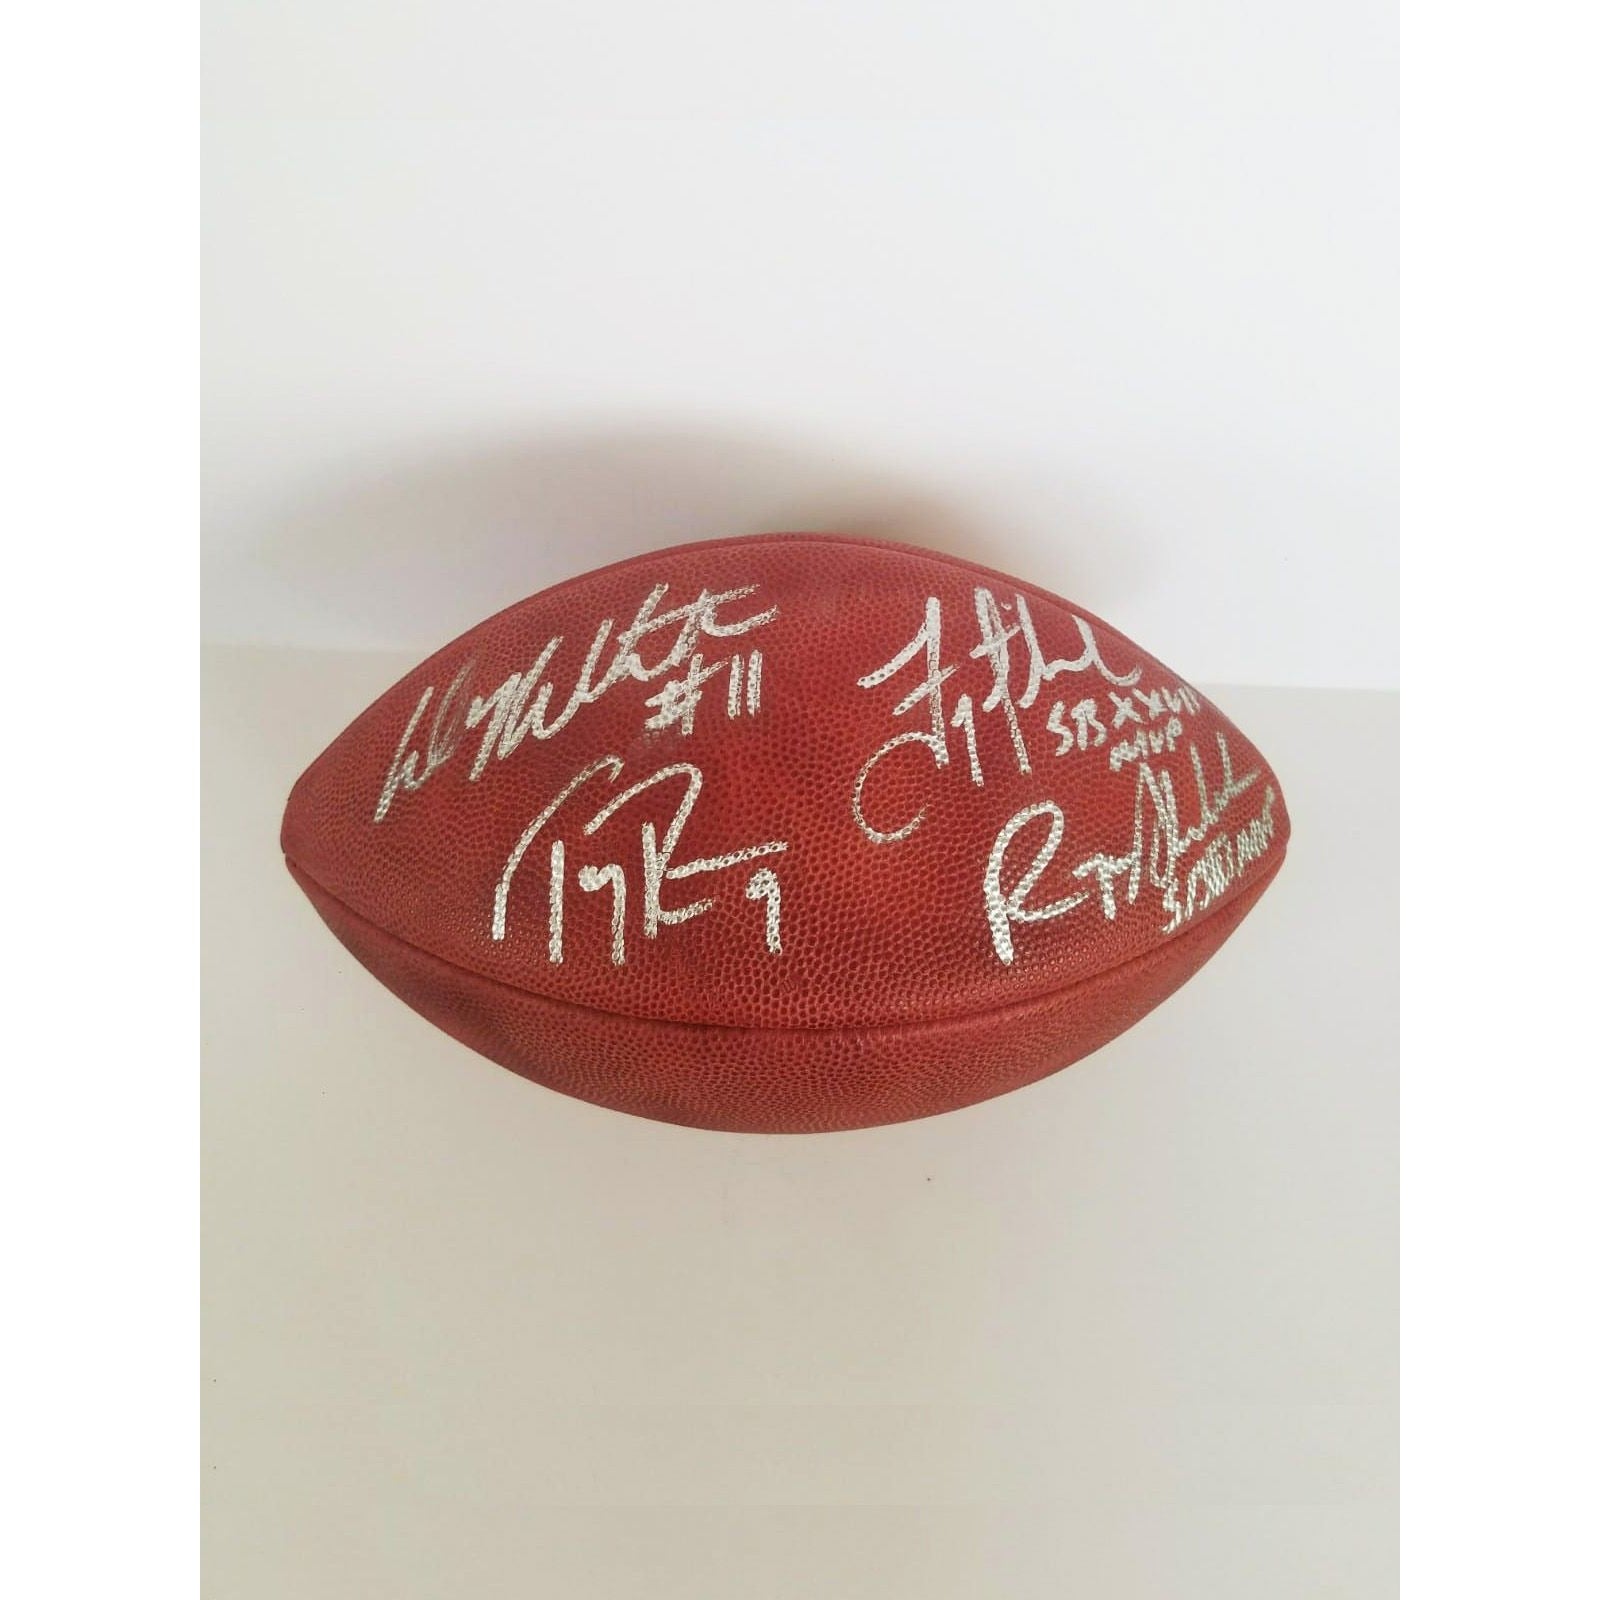 Dallas Cowboys Troy Aikman, Roger Staubach, Tony Romo, Danny White NFL game model football signed with proof with free case